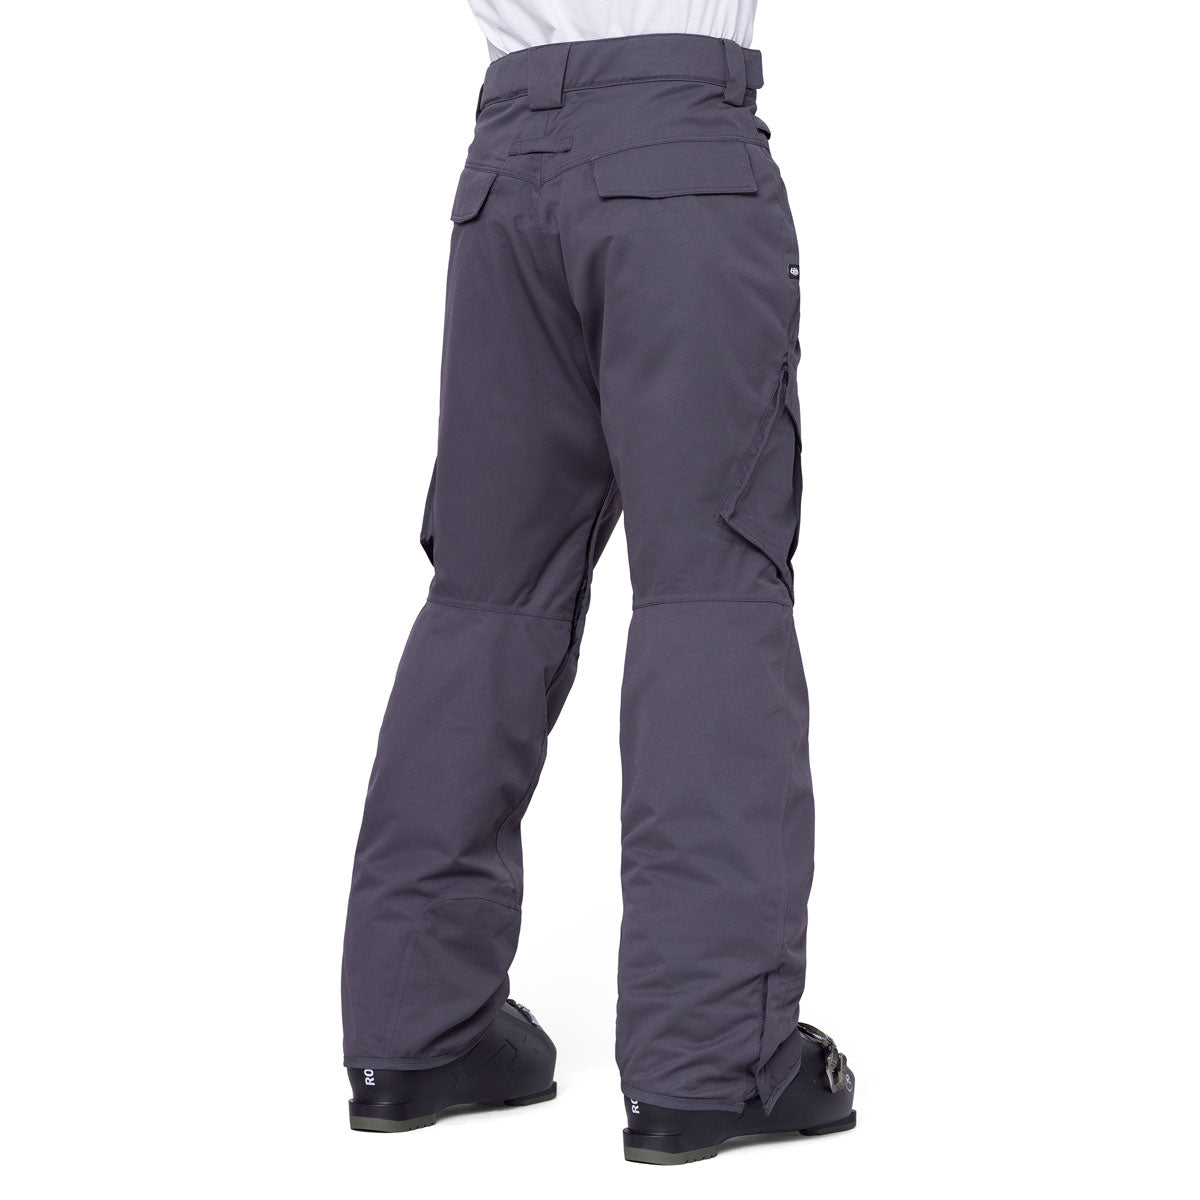 686 Infinity Insl Cargo Snowboard Pants - Charcoal image 2